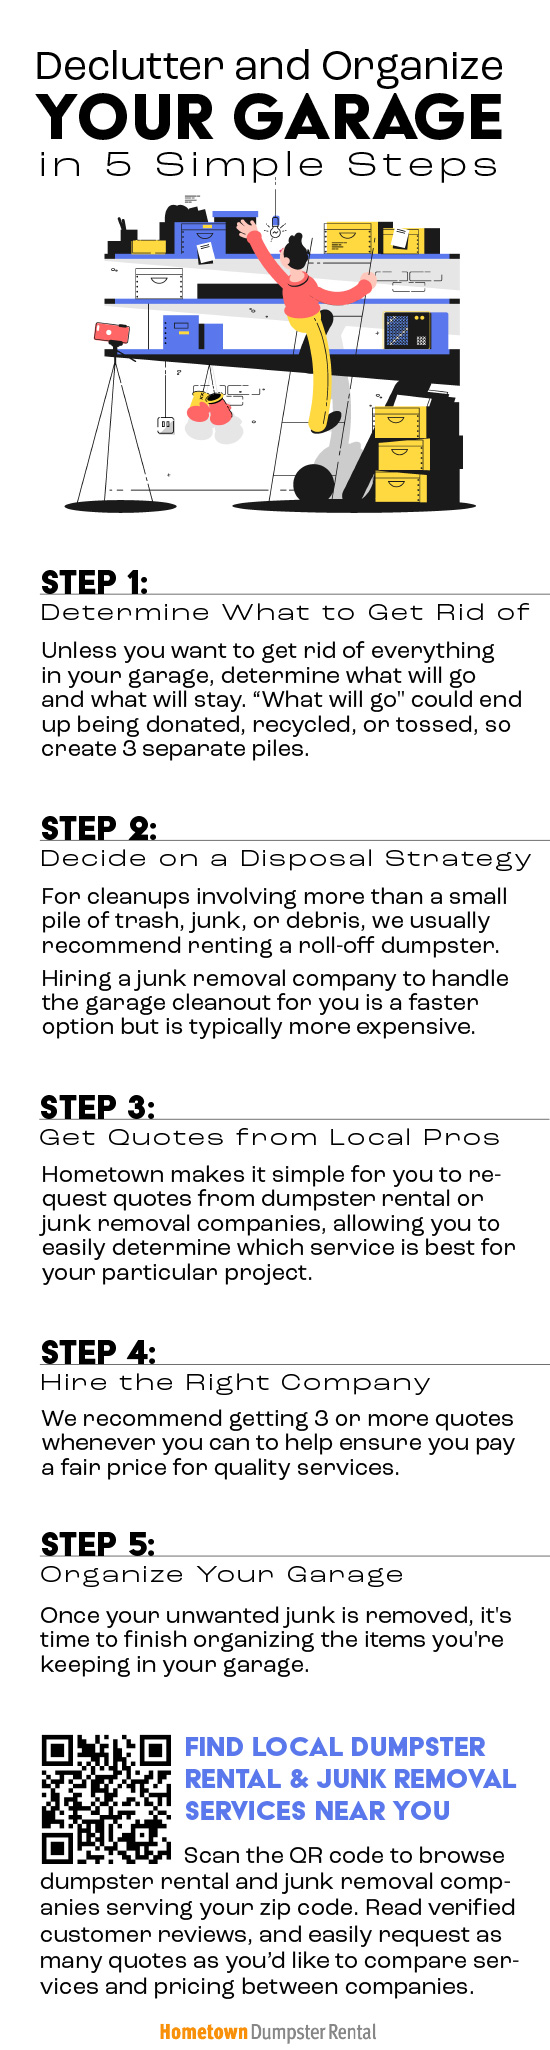 declutter and organize garage in 5 steps infographic